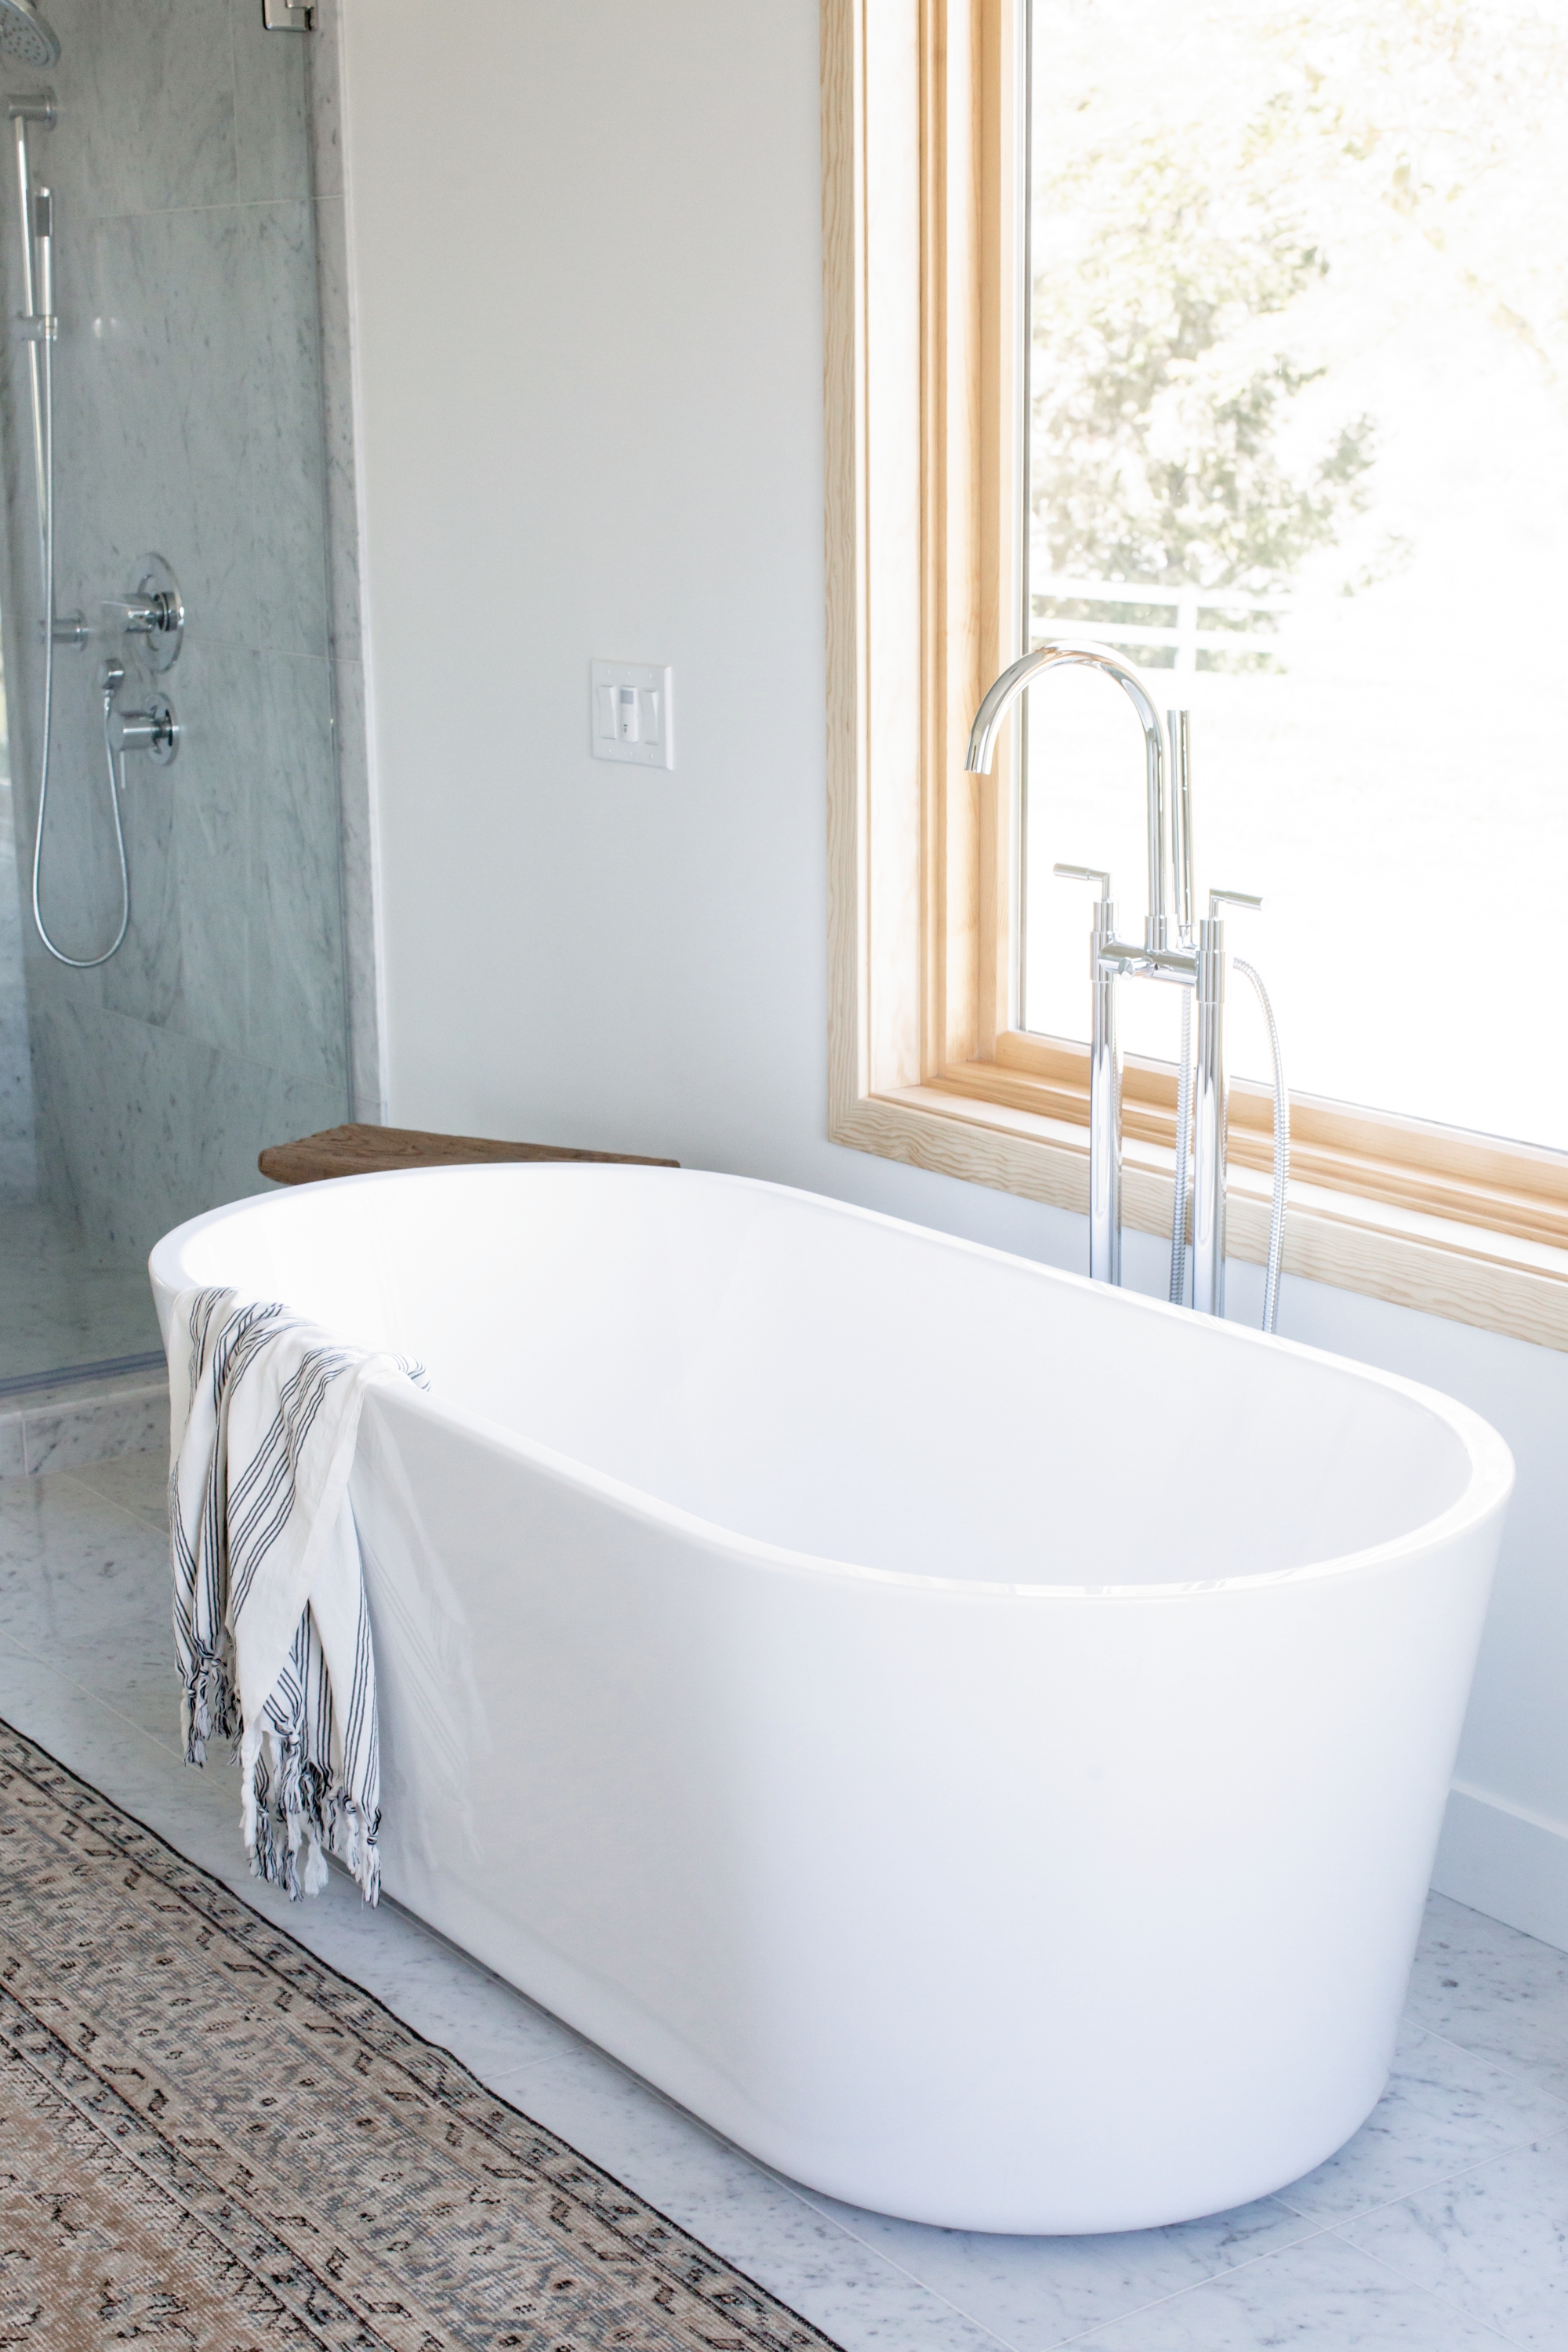 How to Install a Freestanding Bathtub?- A DIY Method With 6 Steps